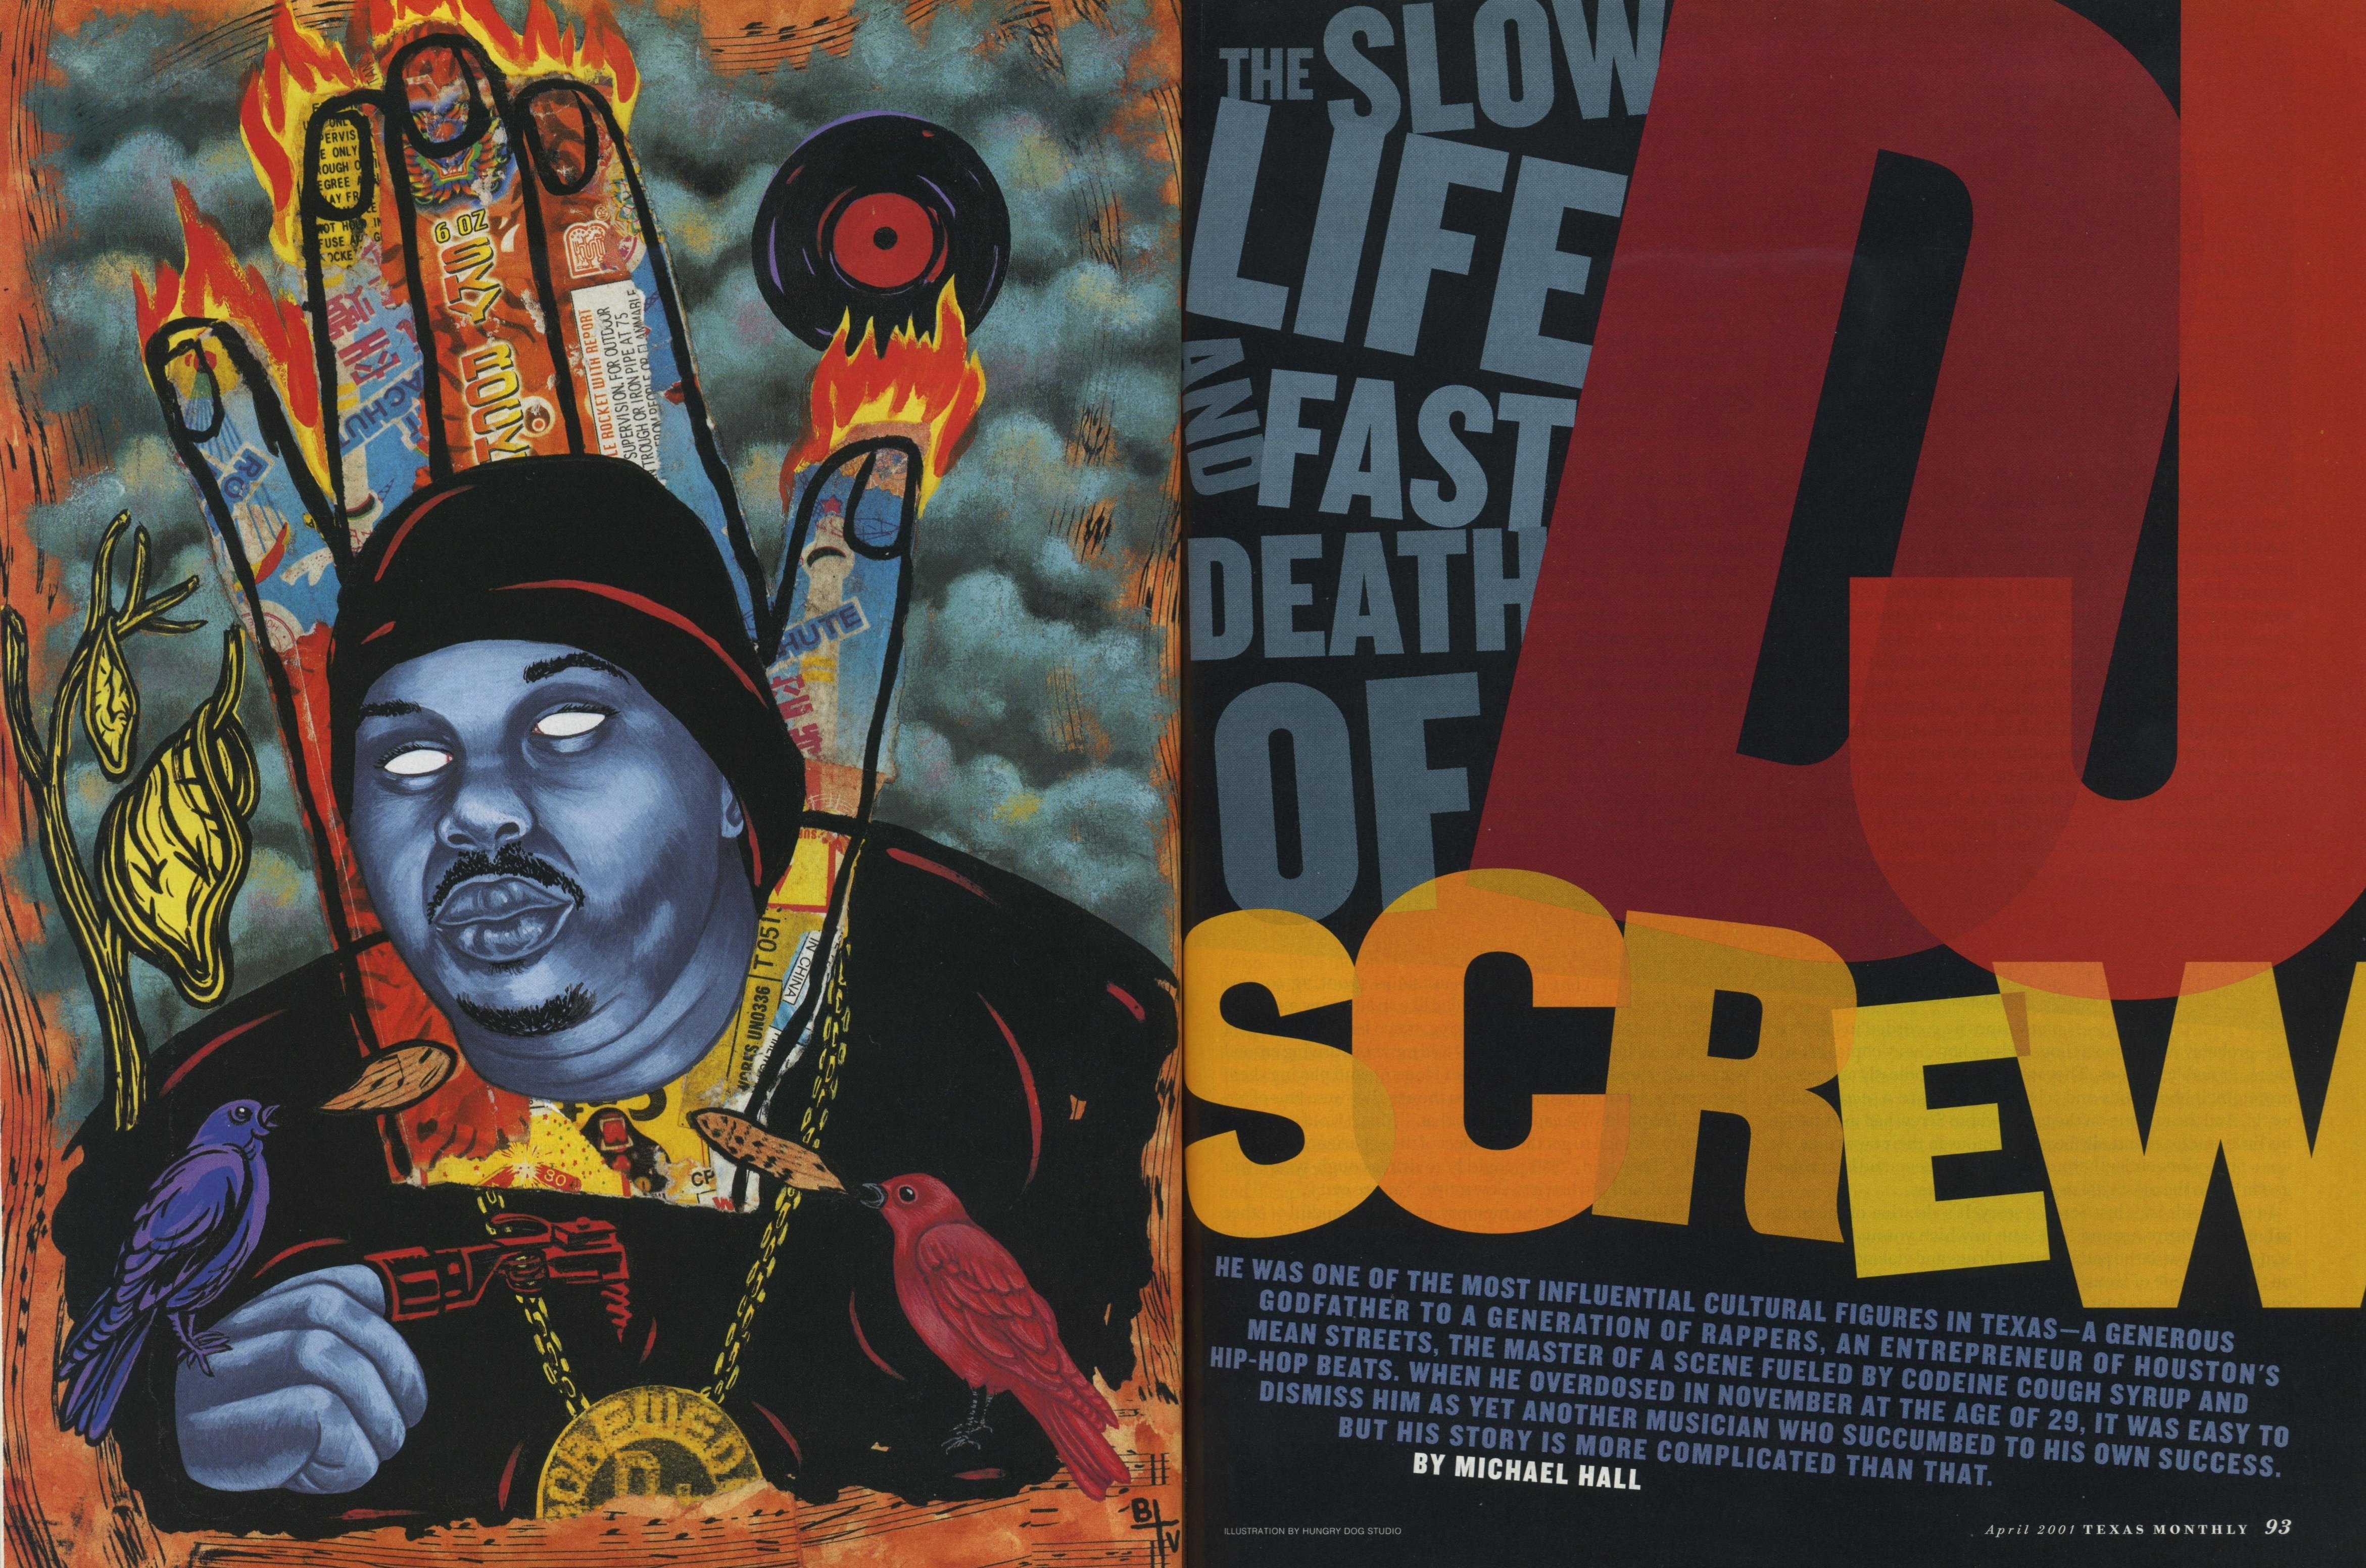 The Slow Life and Fast Death of DJ Screw.